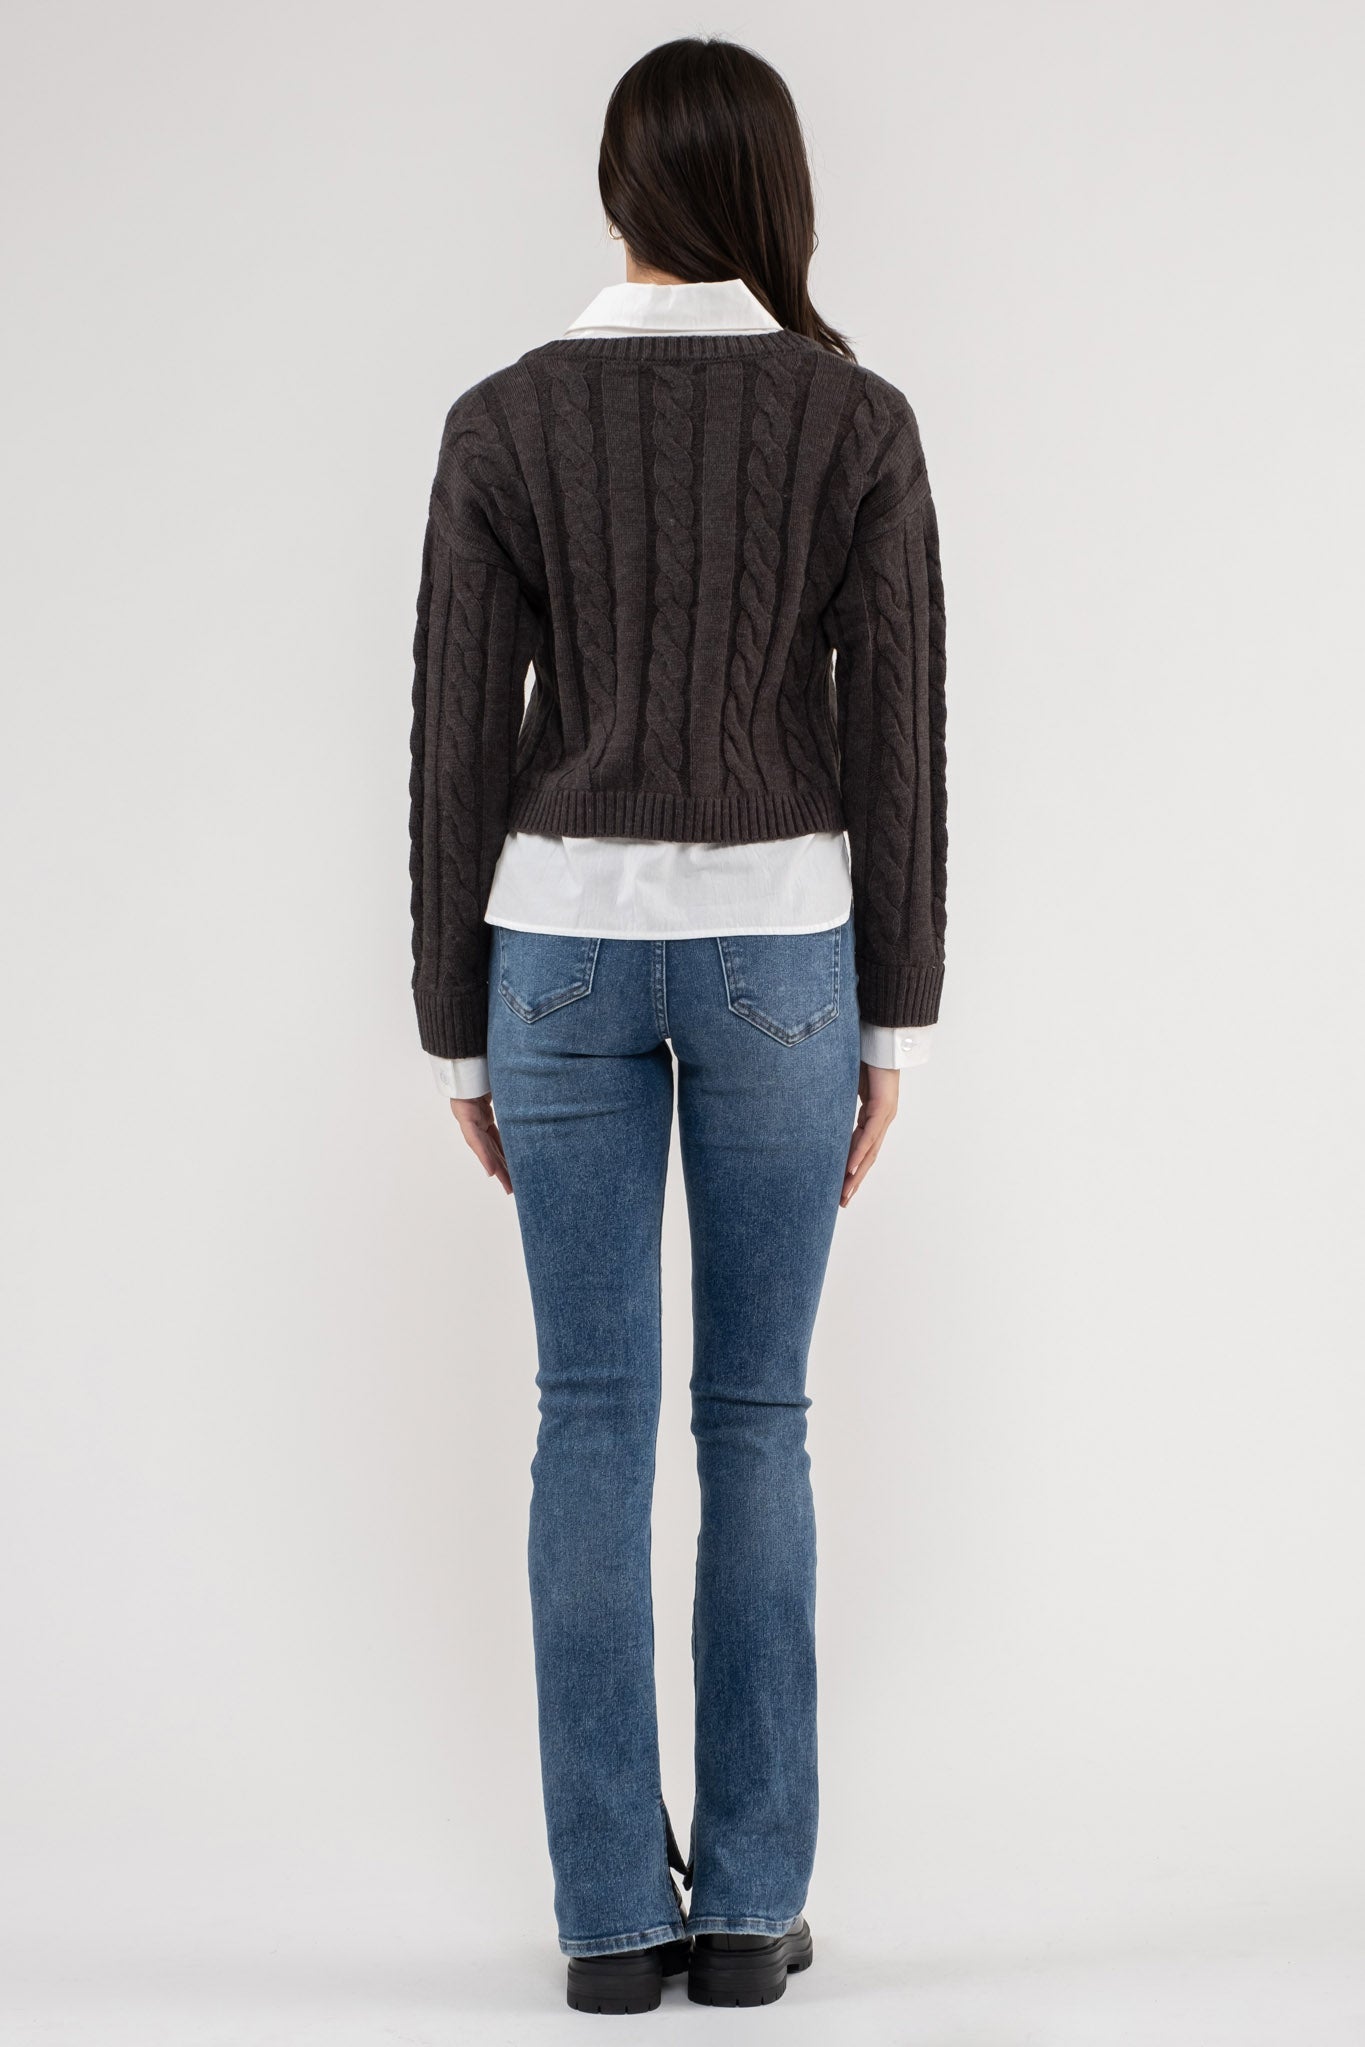 LAYERED VNECK CABLEKNIT SWEATER